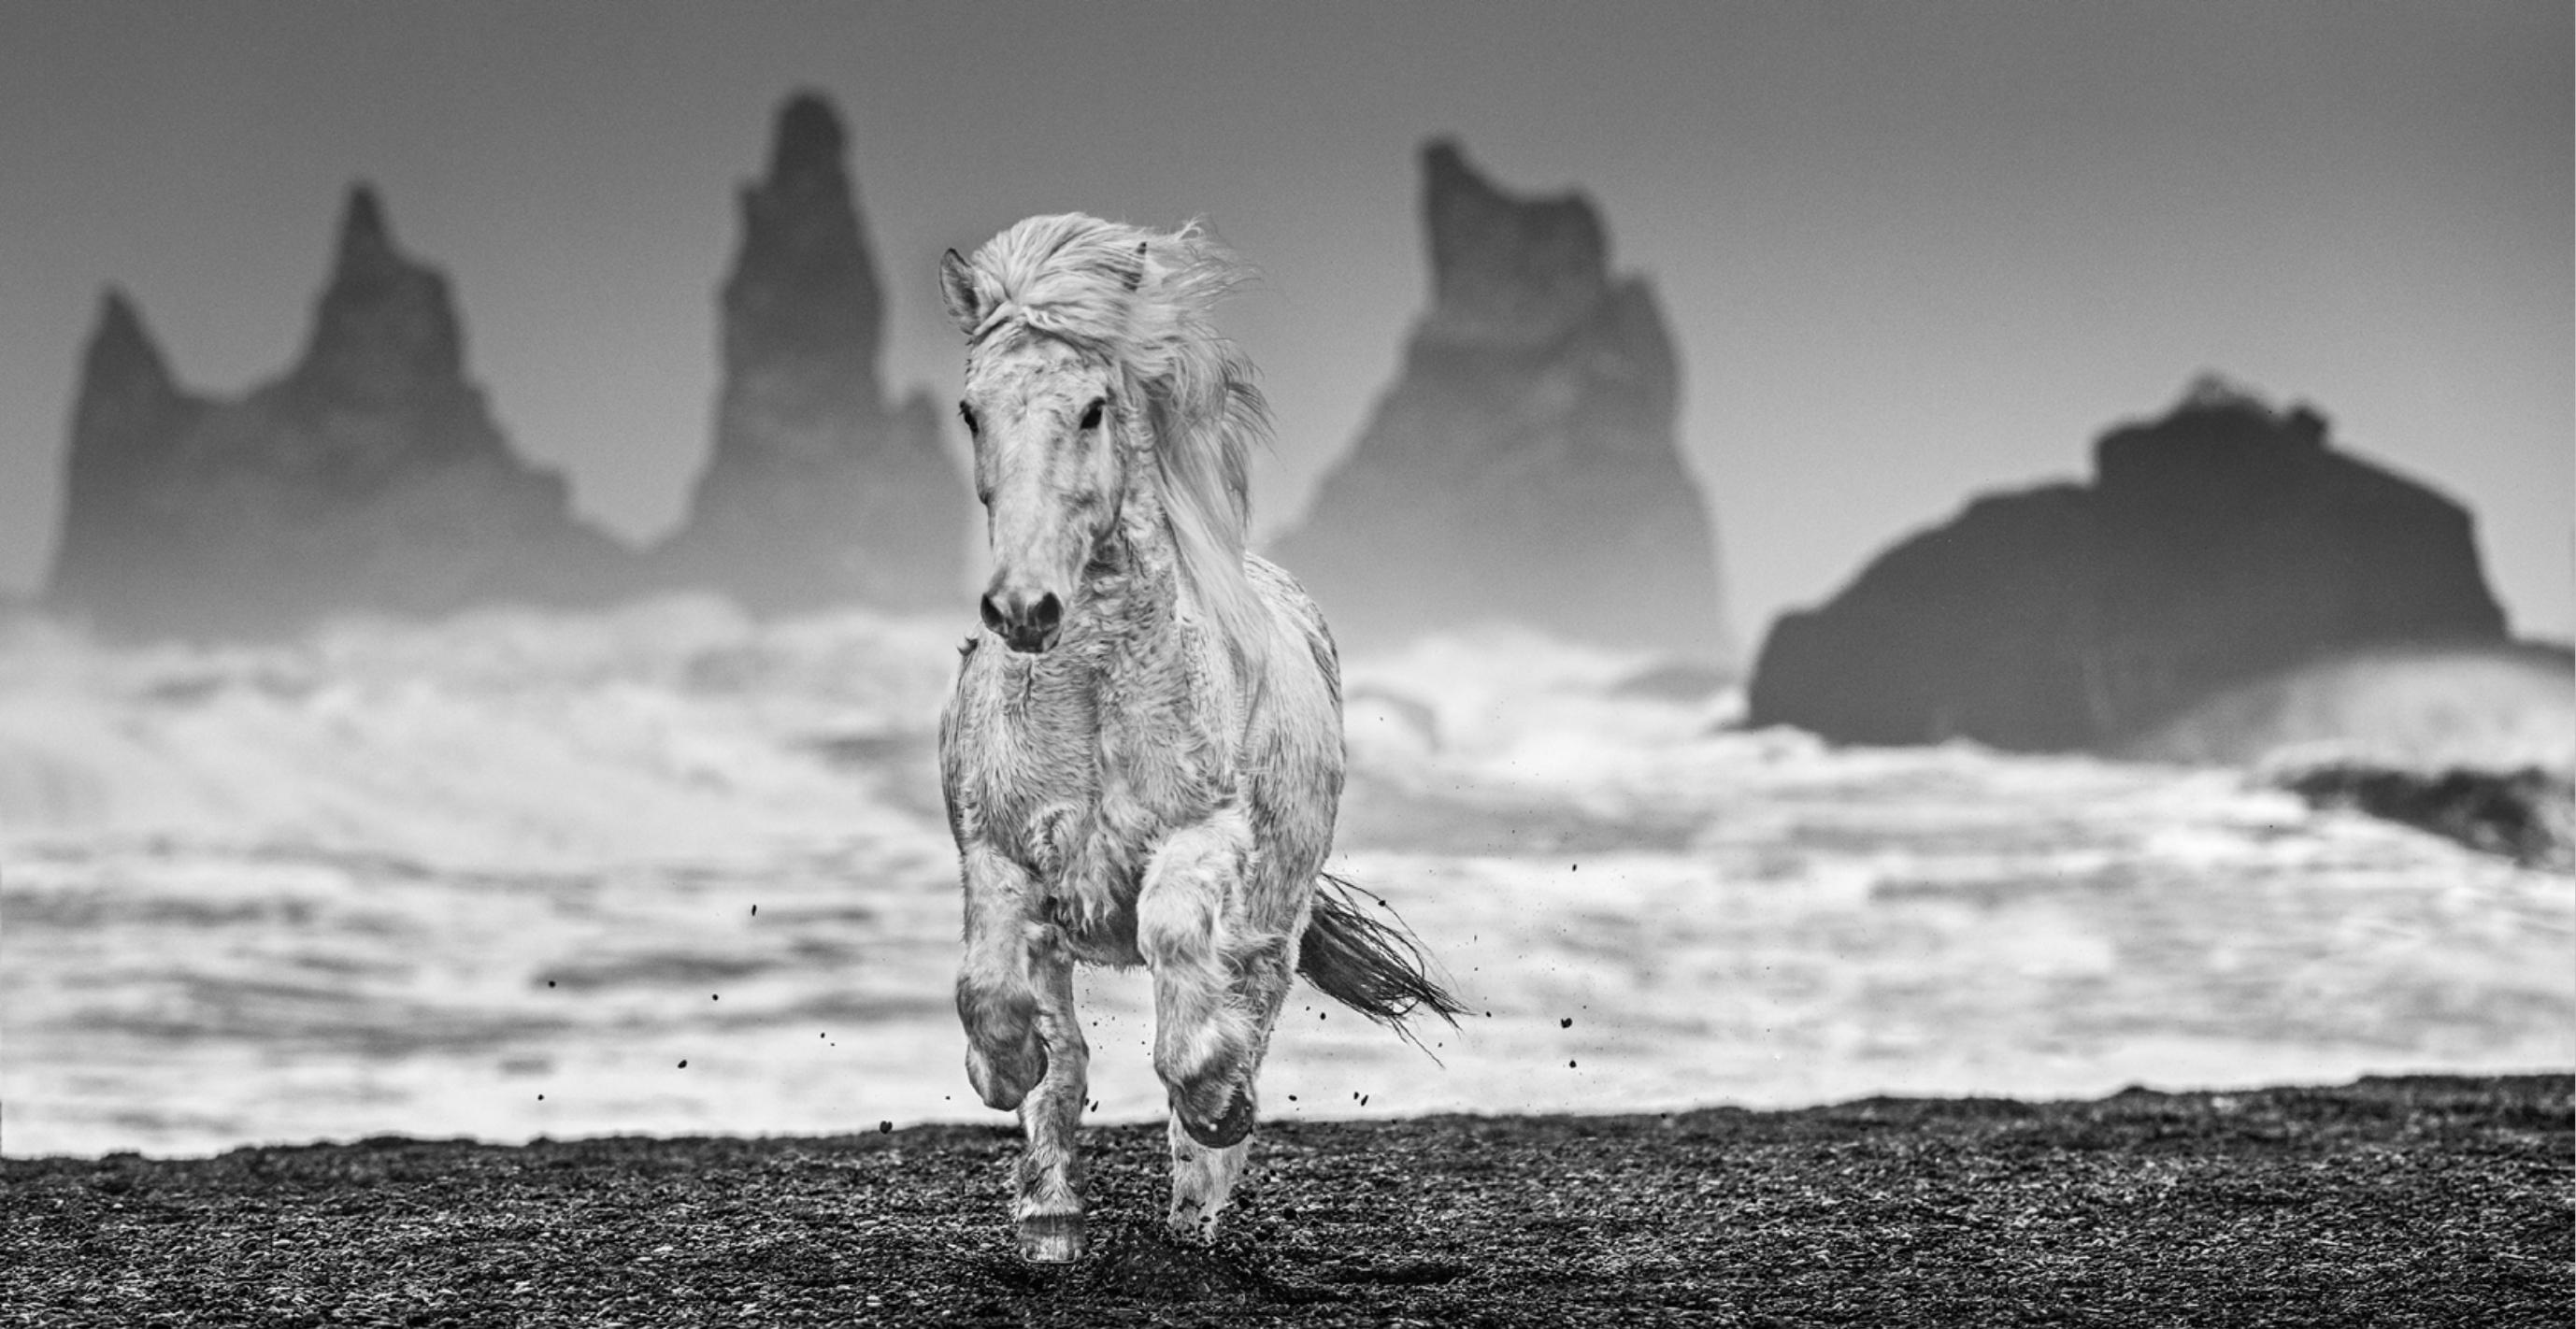 David Yarrow Black and White Photograph - The Perfect Storm